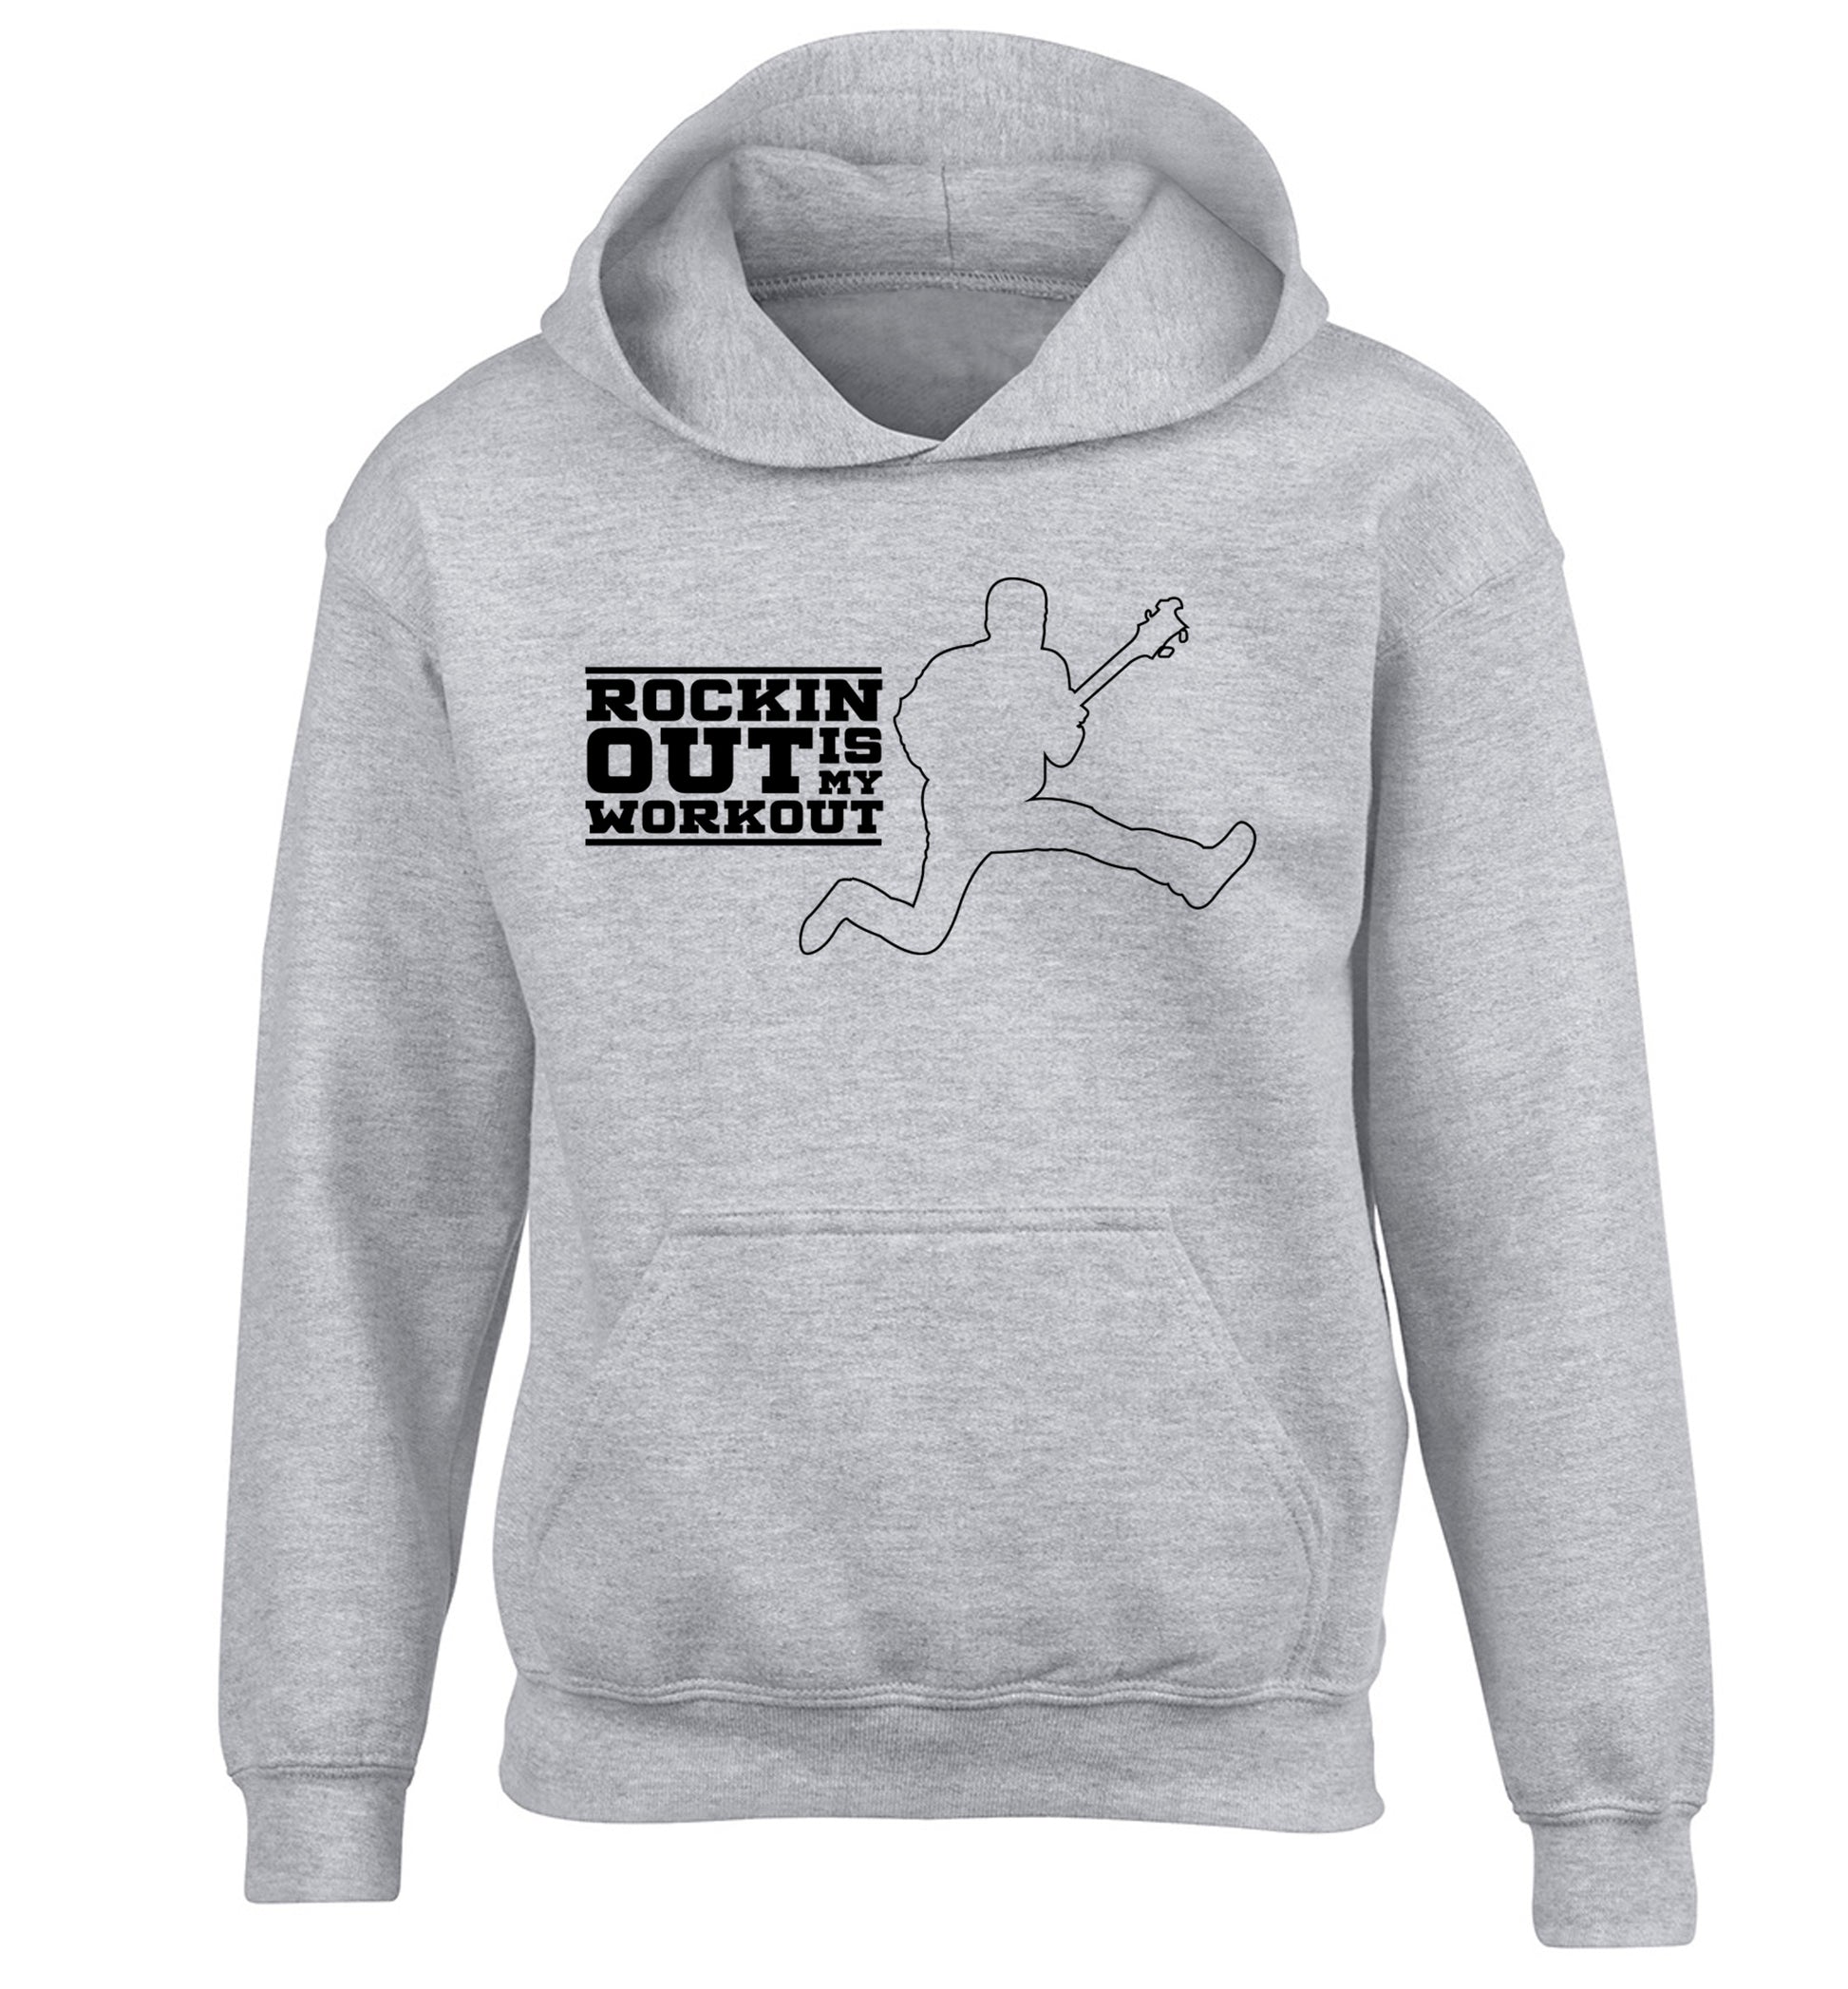 Rockin out is my workout children's grey hoodie 12-13 Years